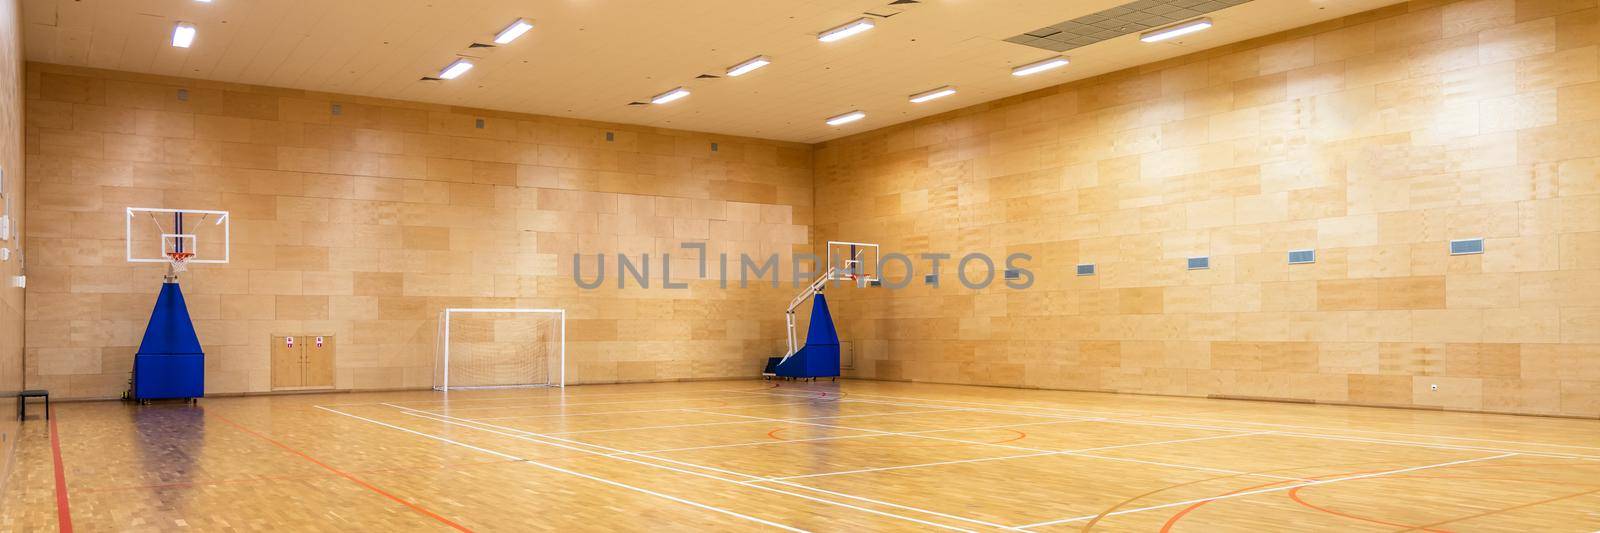 Interior of empty modern basketball or soccer indoor sport court by Mariakray